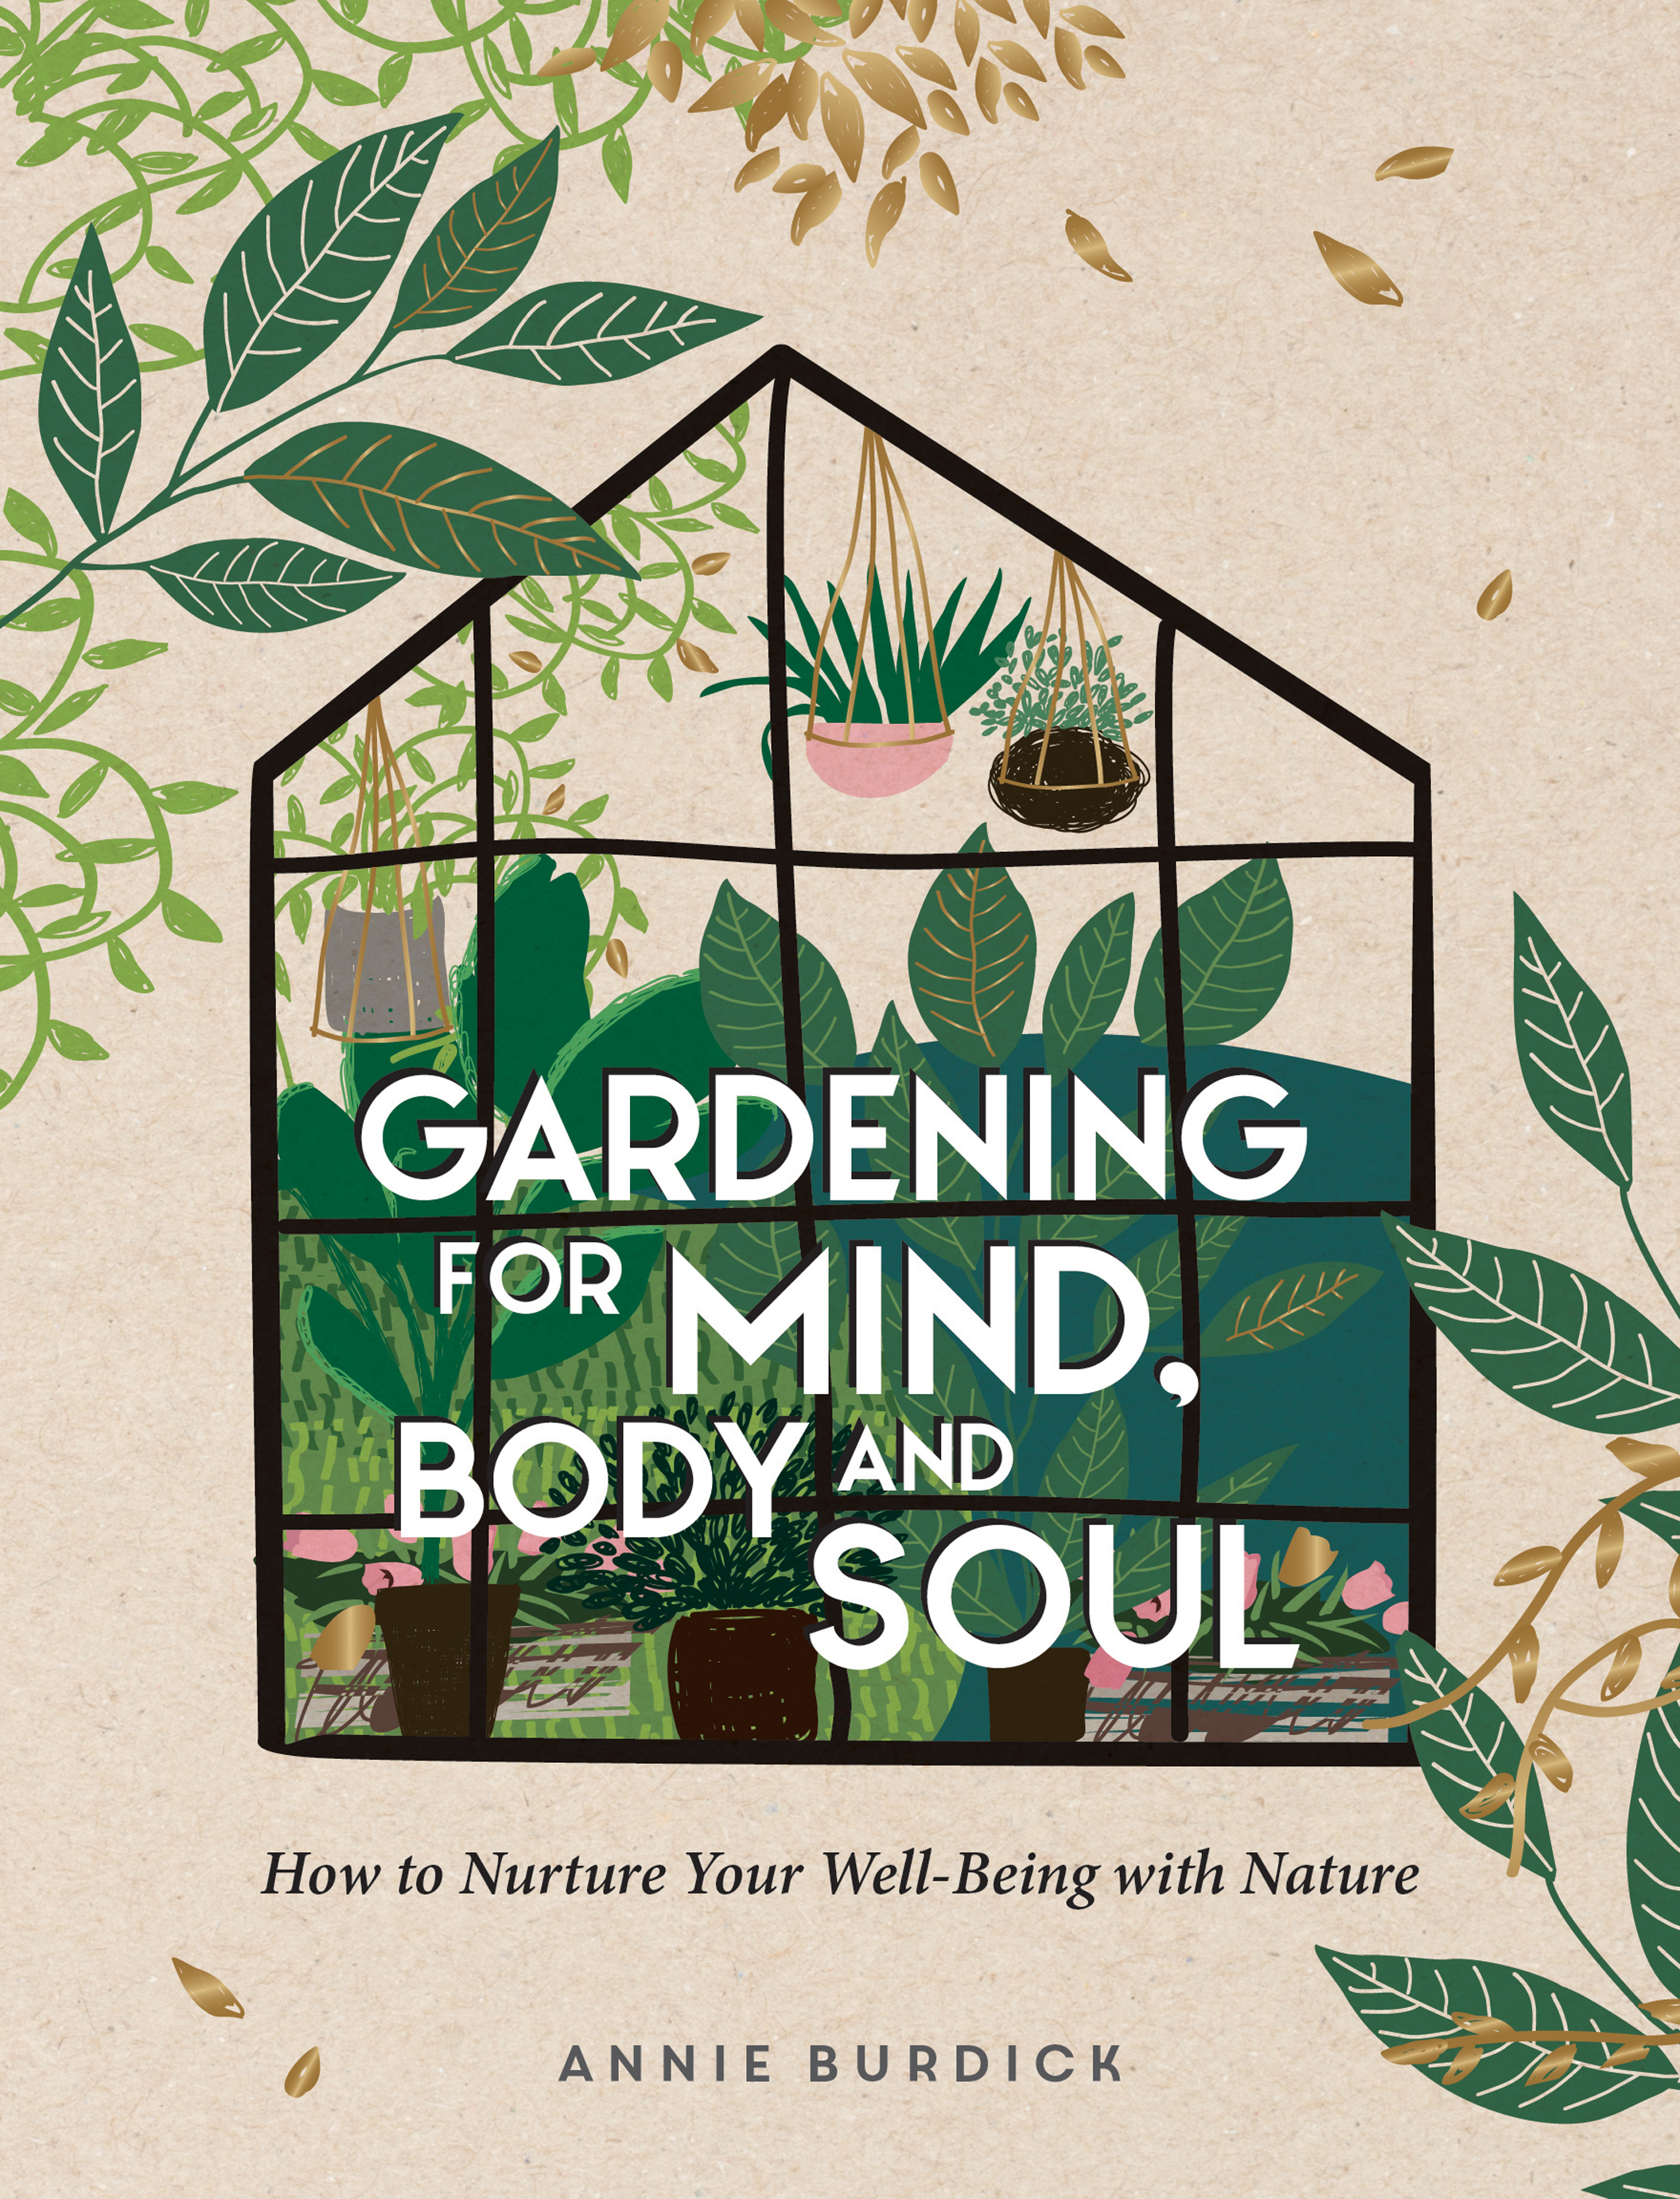 Gardening for mind, body and soul by annie burdick (vie books/pa)